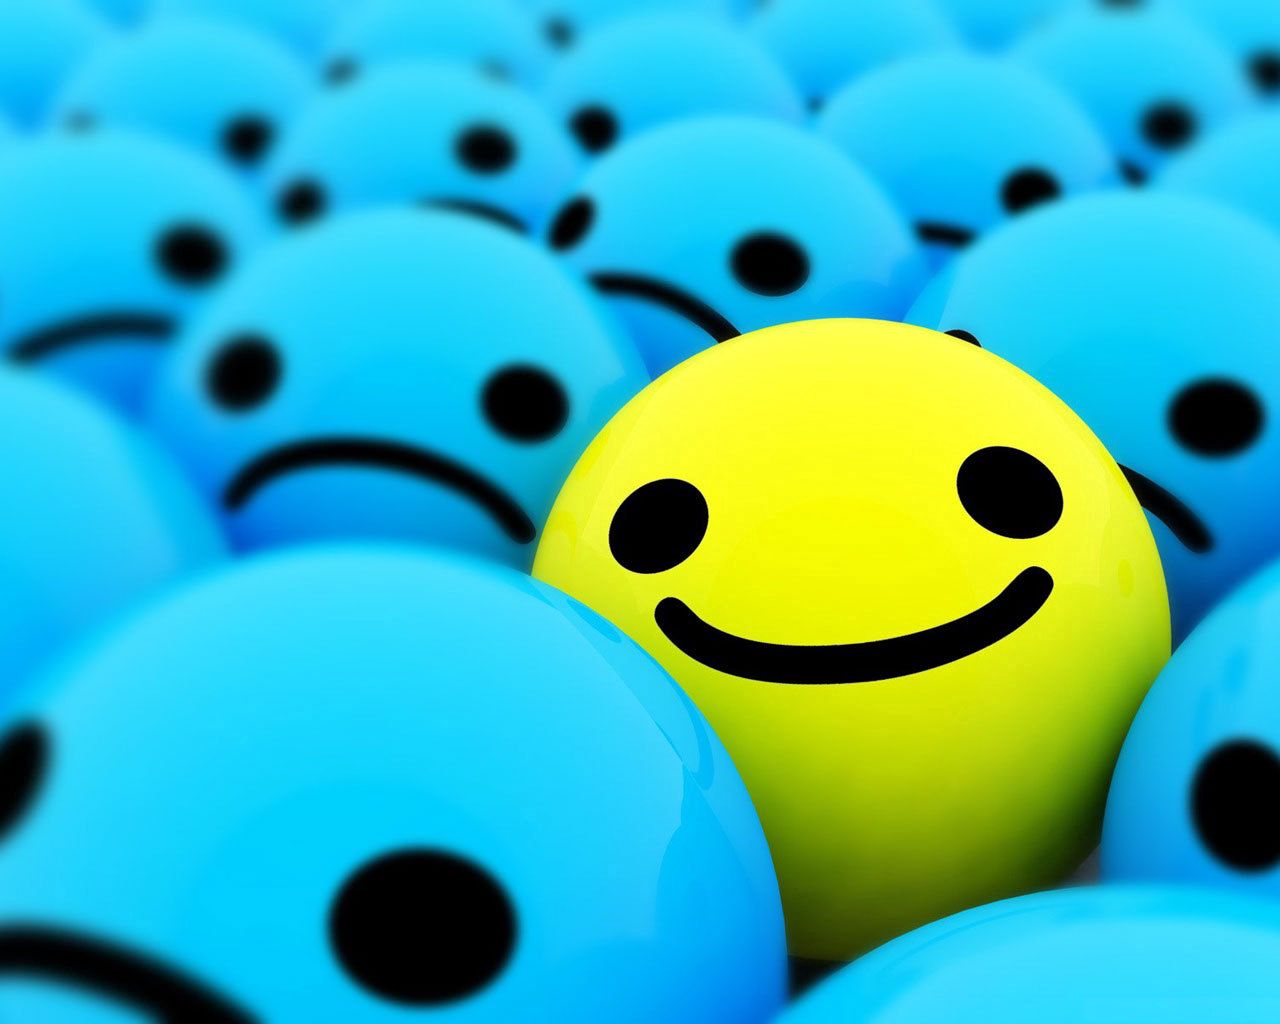 bright, smile, yellow, abstract, blue cell phone wallpapers